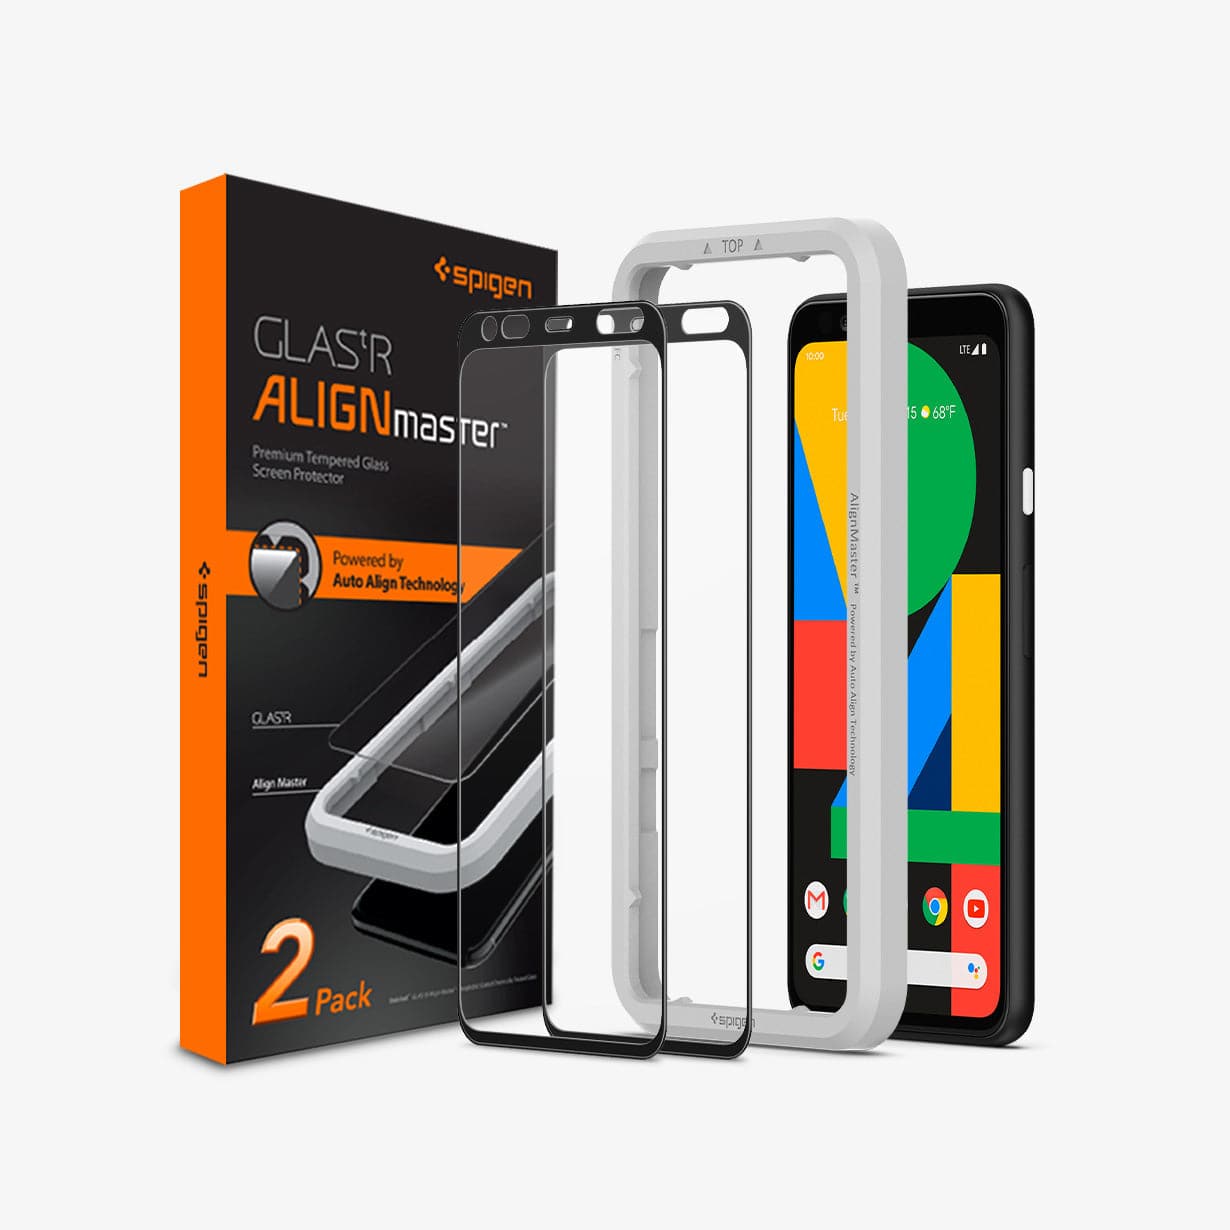 AGL00481 - Pixel 4 Series Alignmaster Full Cover Screen Protector showing the device, alignment tray, two screen protectors and packaging